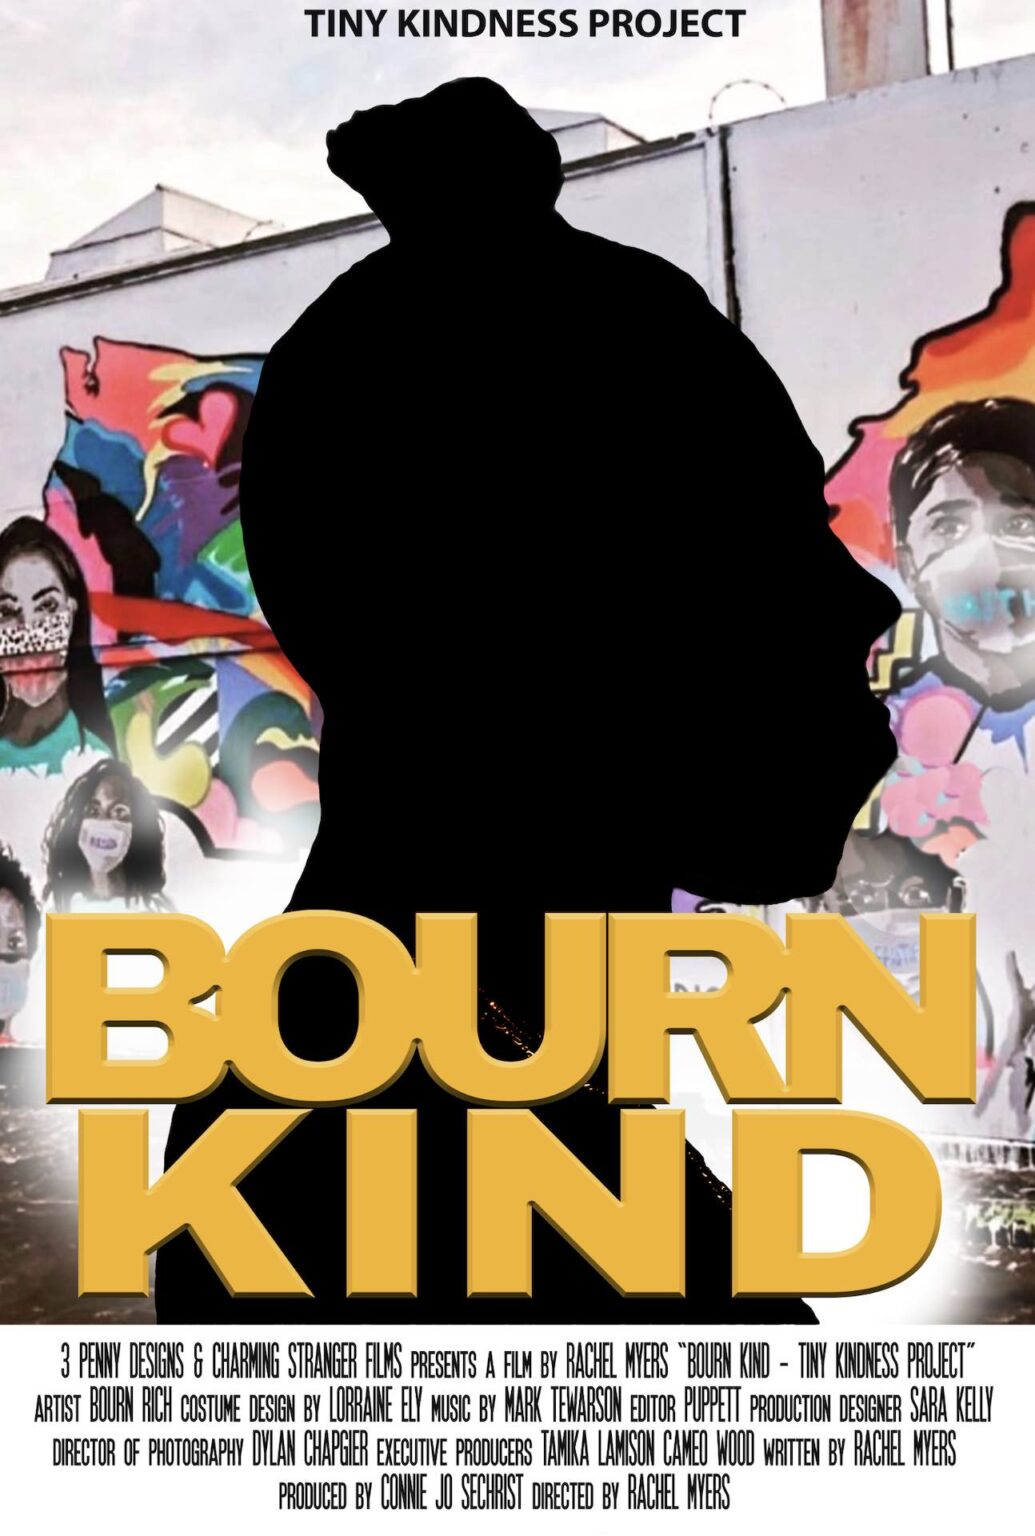 “BOURN KIND” is a film, social activism project and street art campaign, and built-in activation of artist Bourn Rich. Watch the official trailer here.